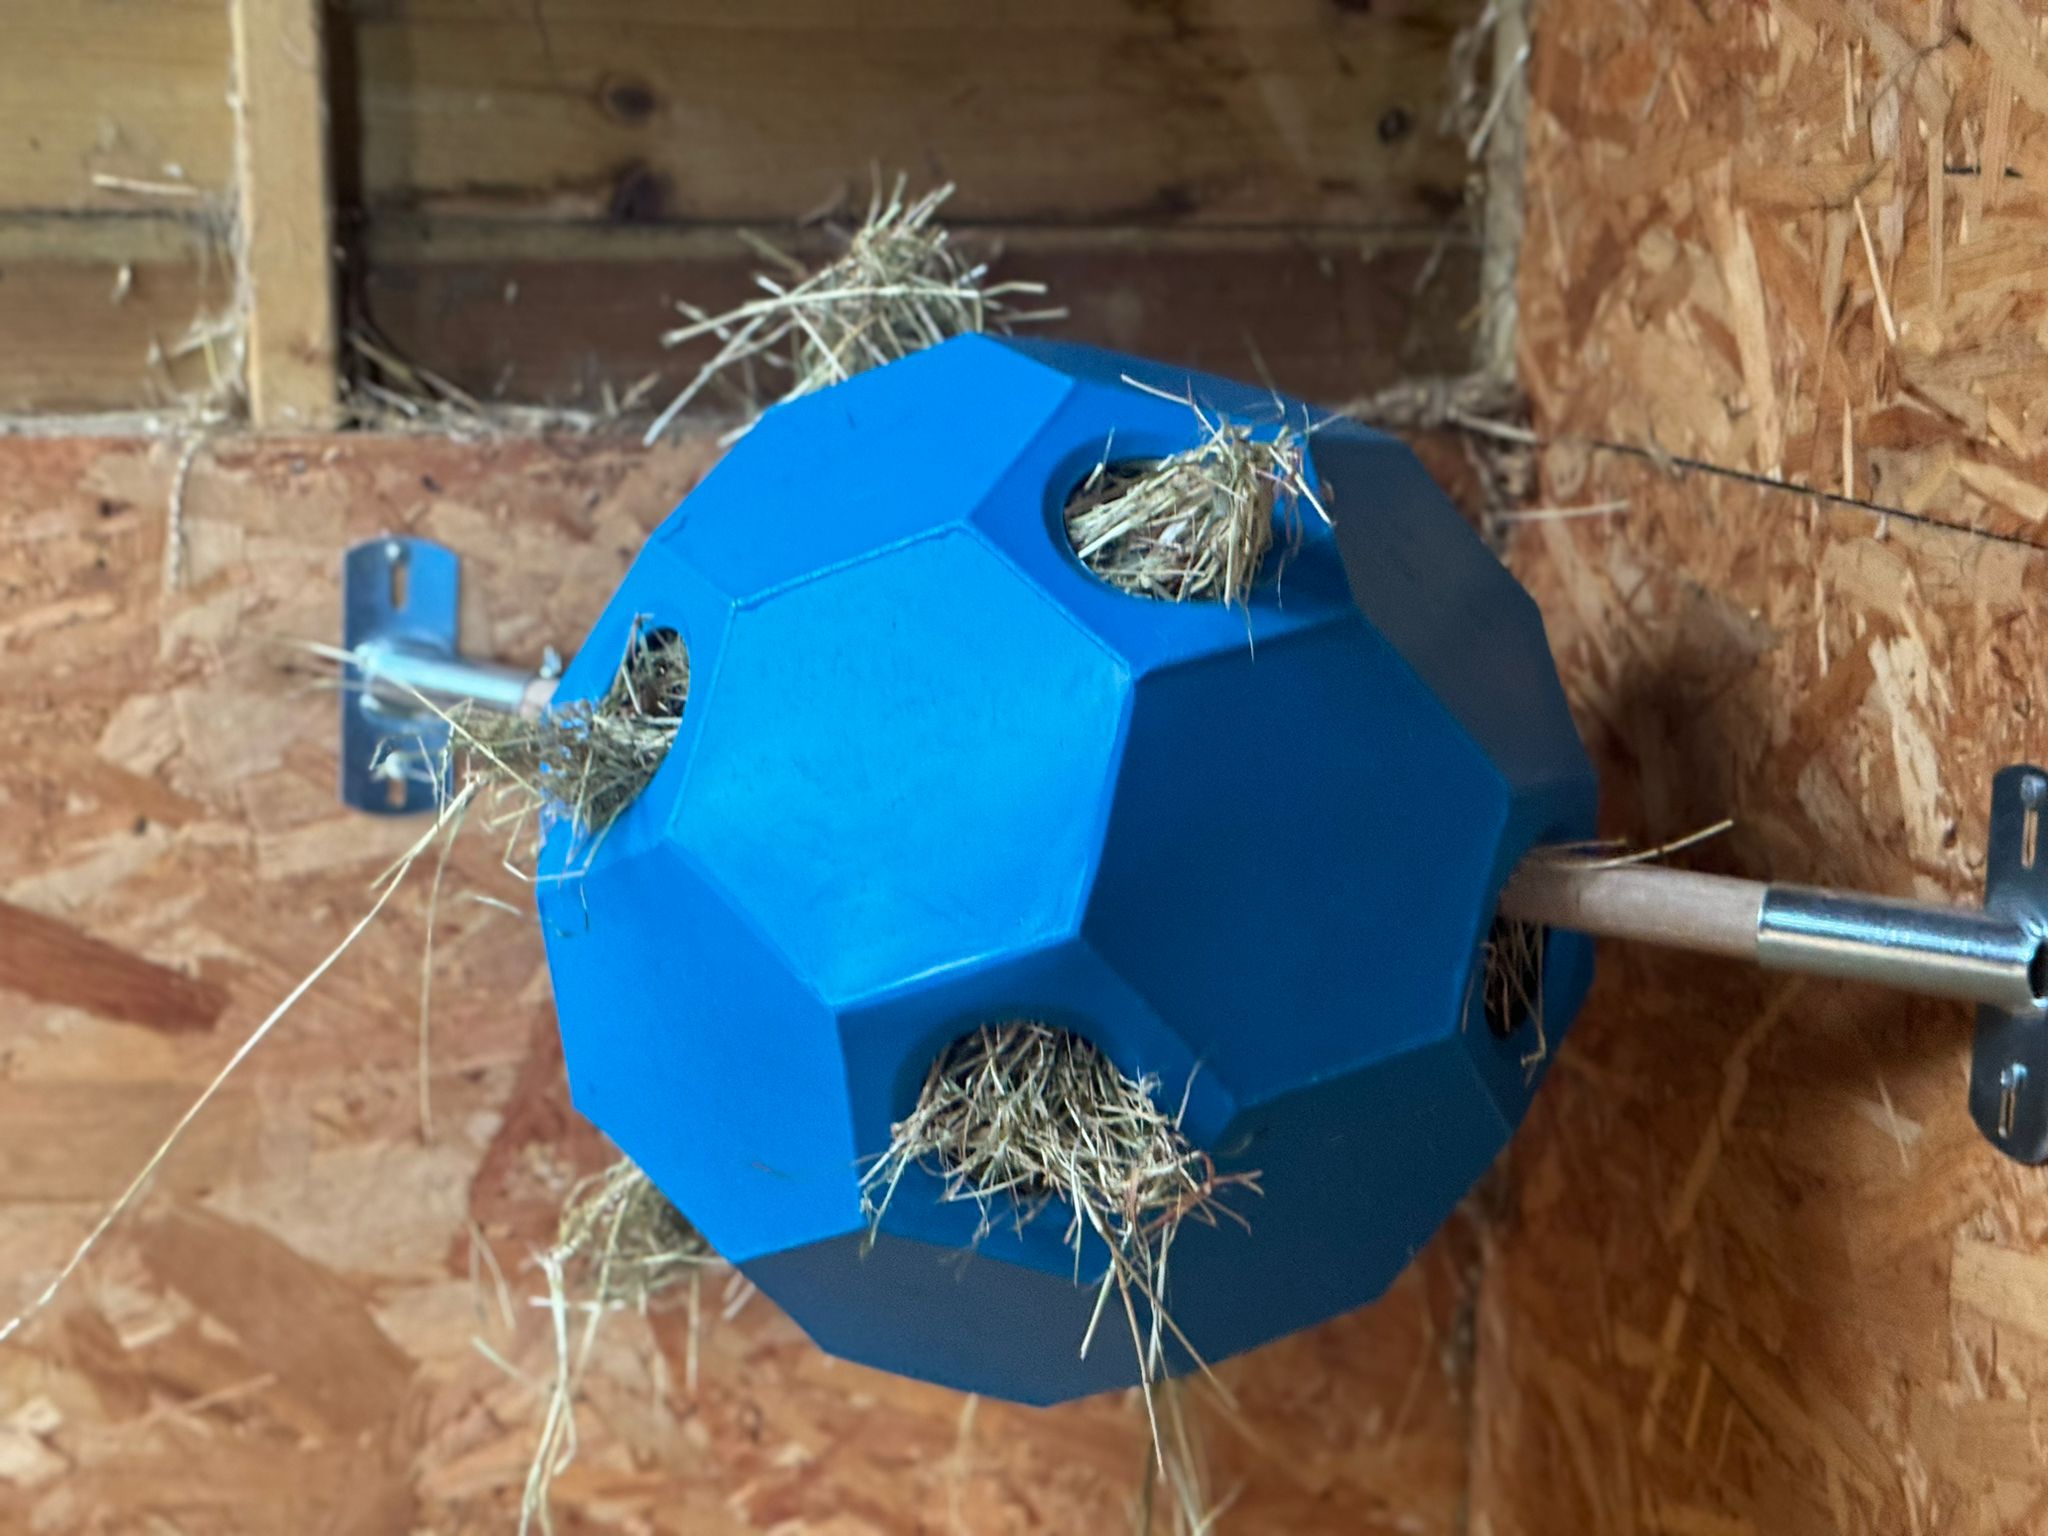 The Hay Play Spinner Image